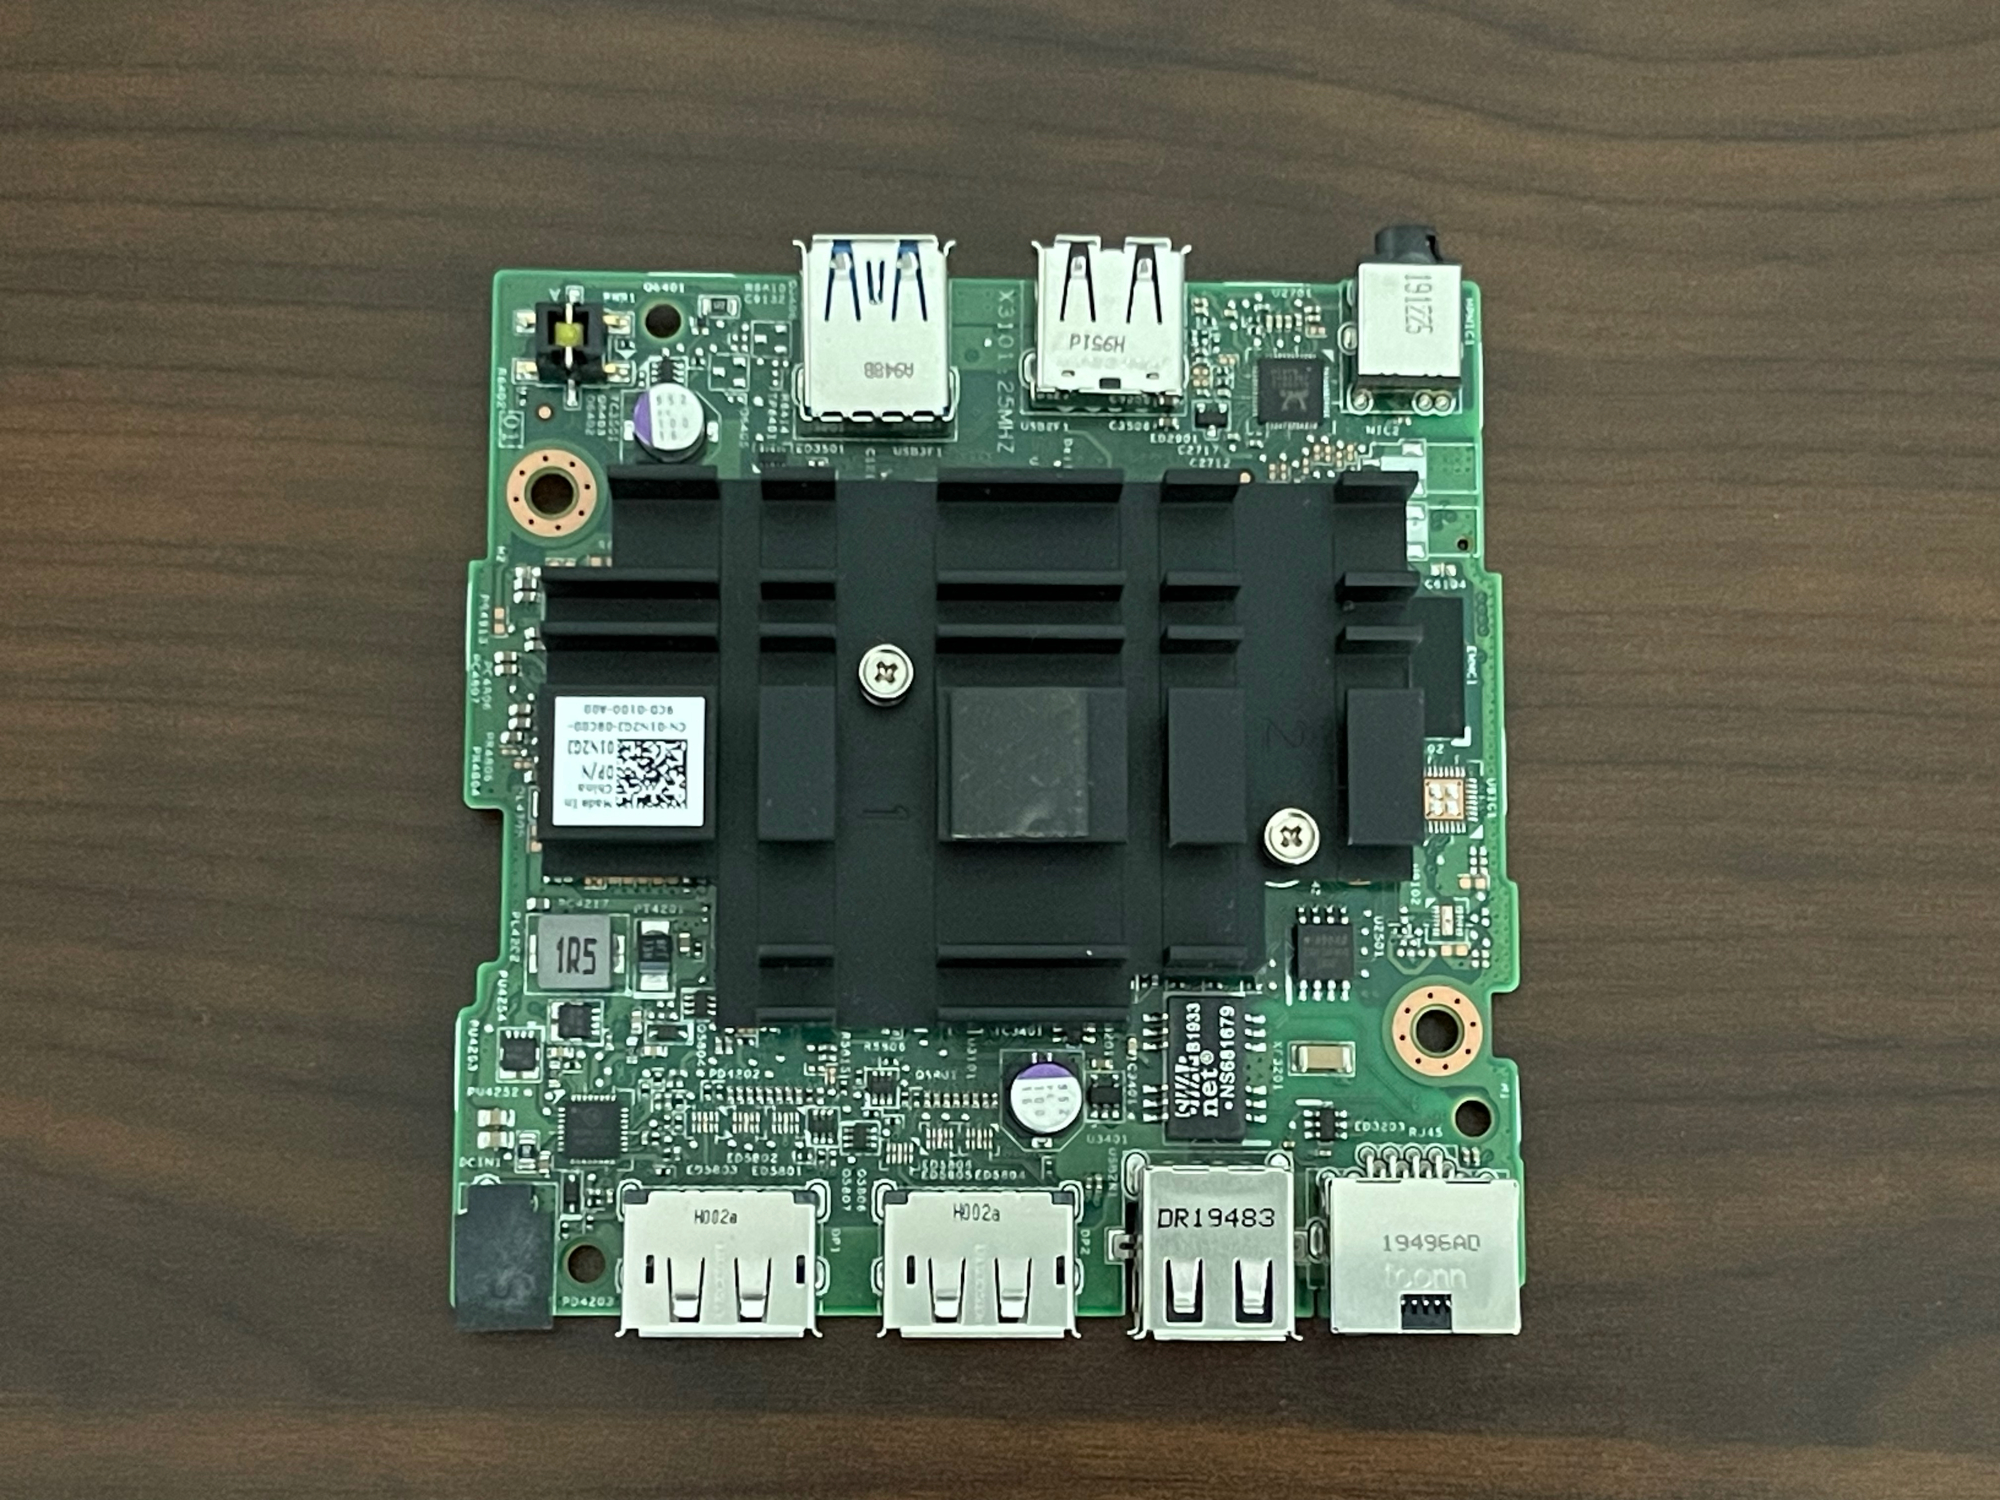 Dell Wyse 3040 Thin Client - Motherboard (Top). The heatsink covers the CPU, eMMC and RAM chips.